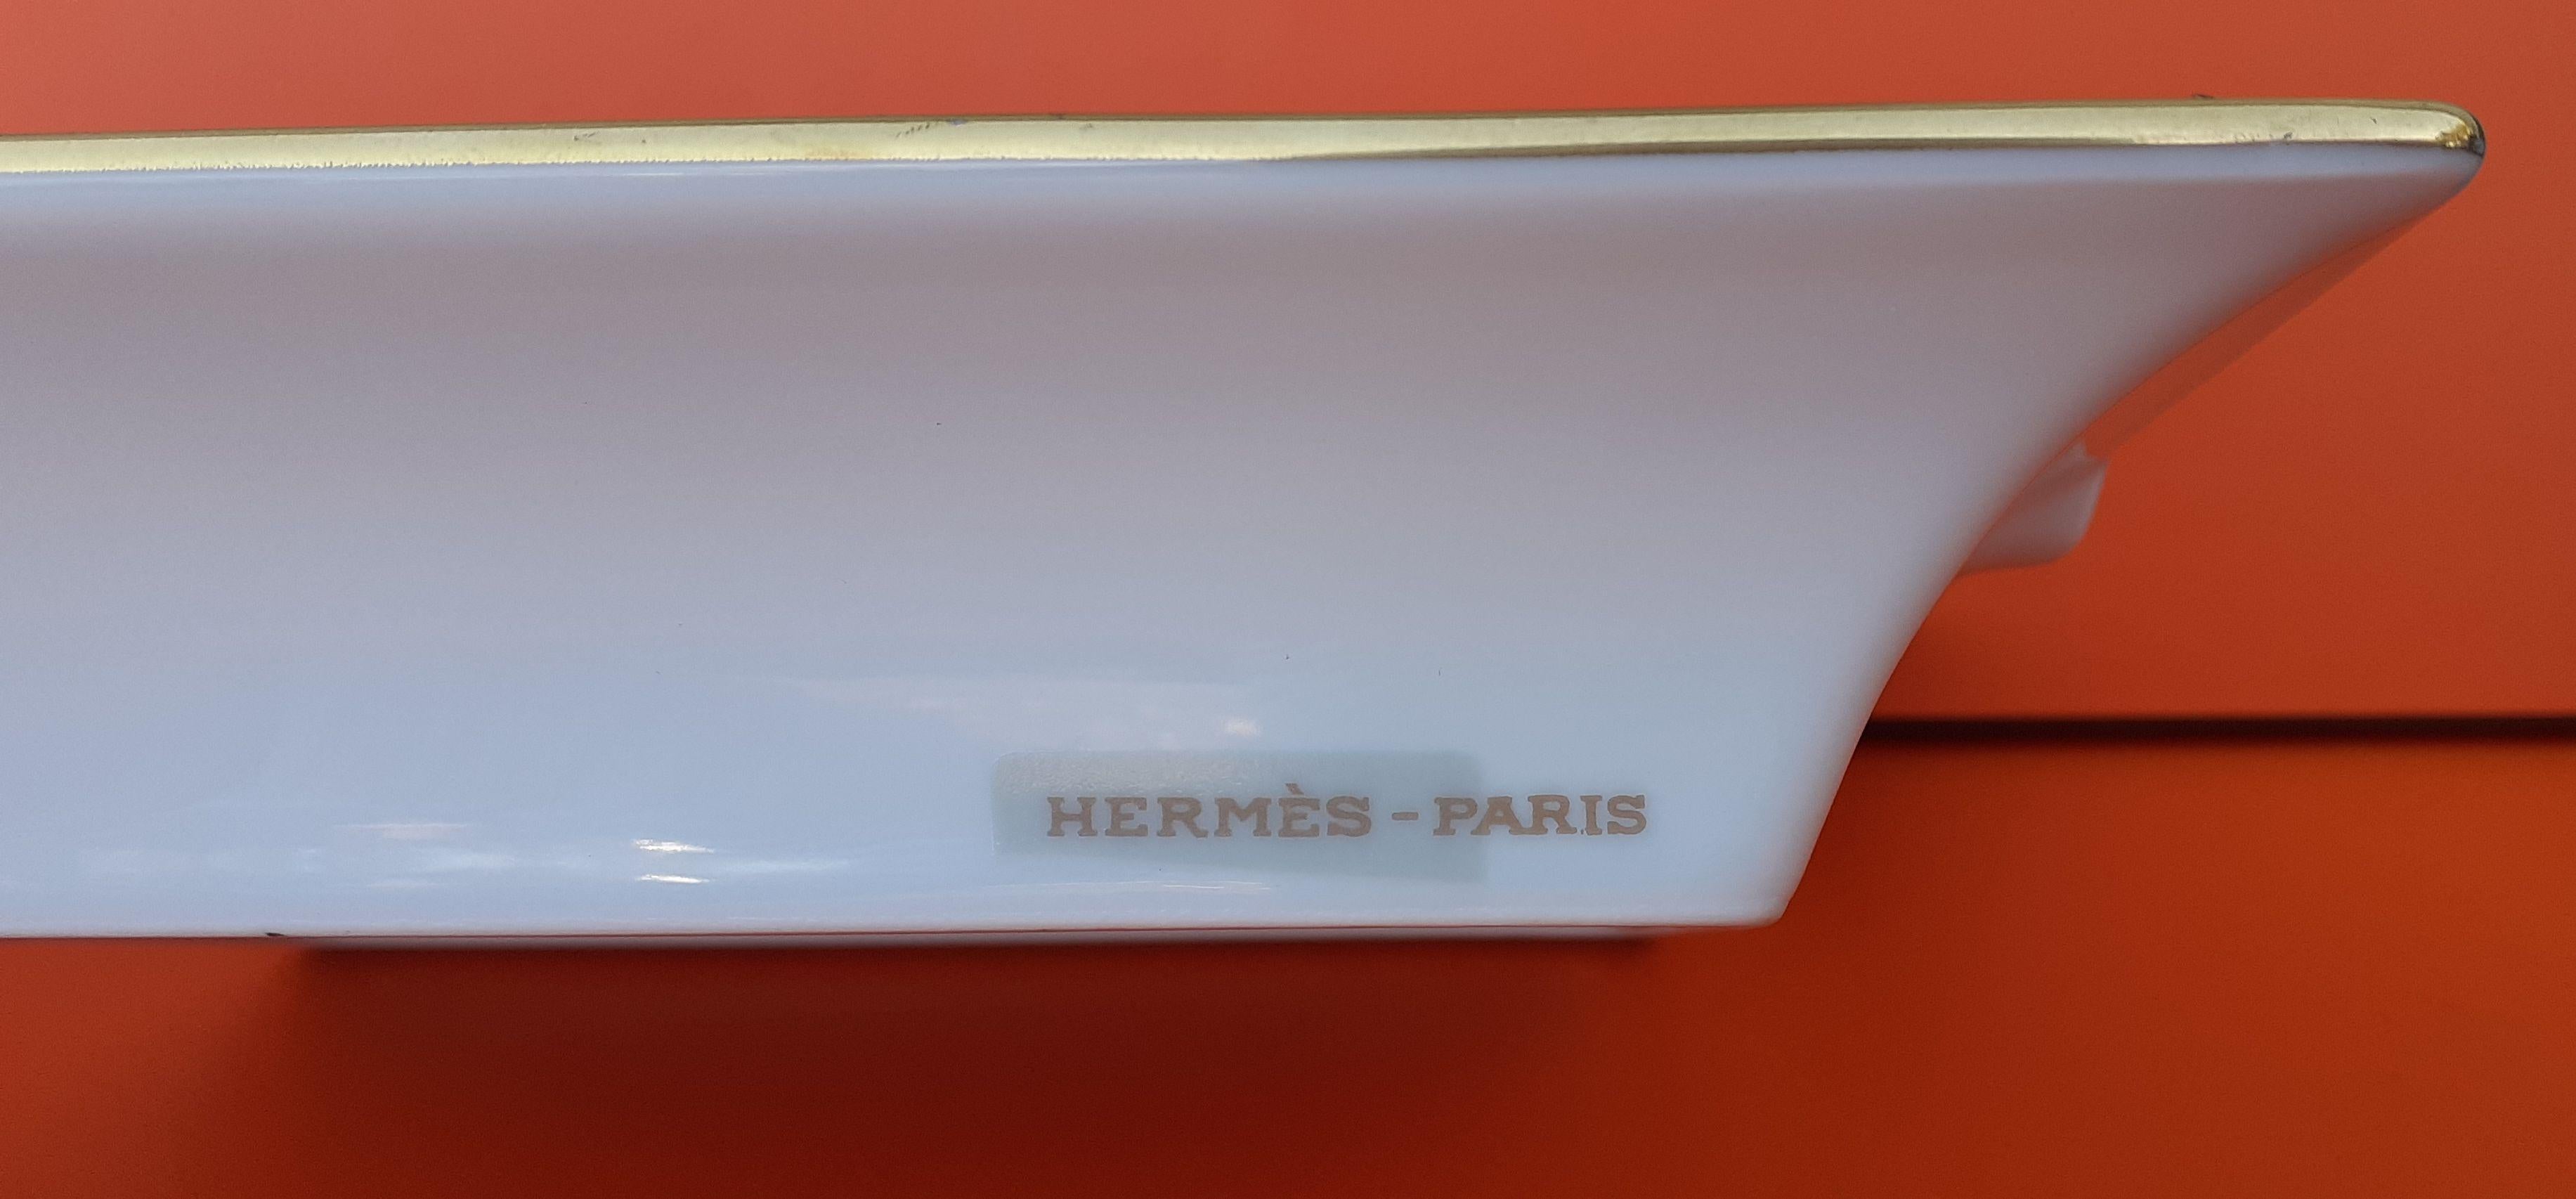 Hermès Ashtray Change Tray Chinese Astrology Year of The Rat In Porcelain For Sale 4